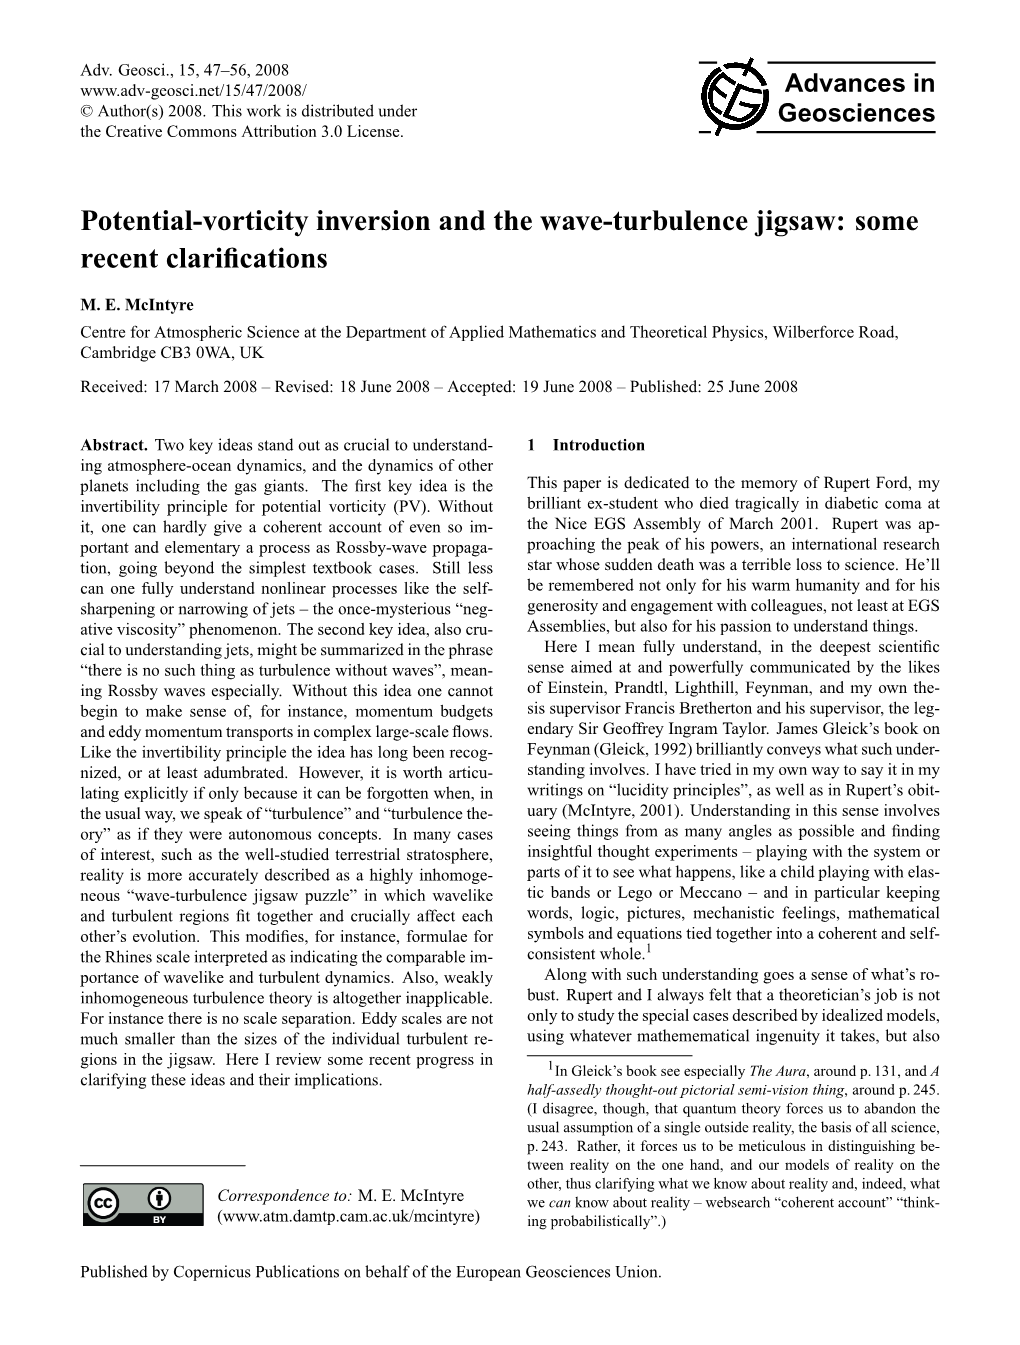 Potential-Vorticity Inversion and the Wave-Turbulence Jigsaw: Some Recent Clariﬁcations